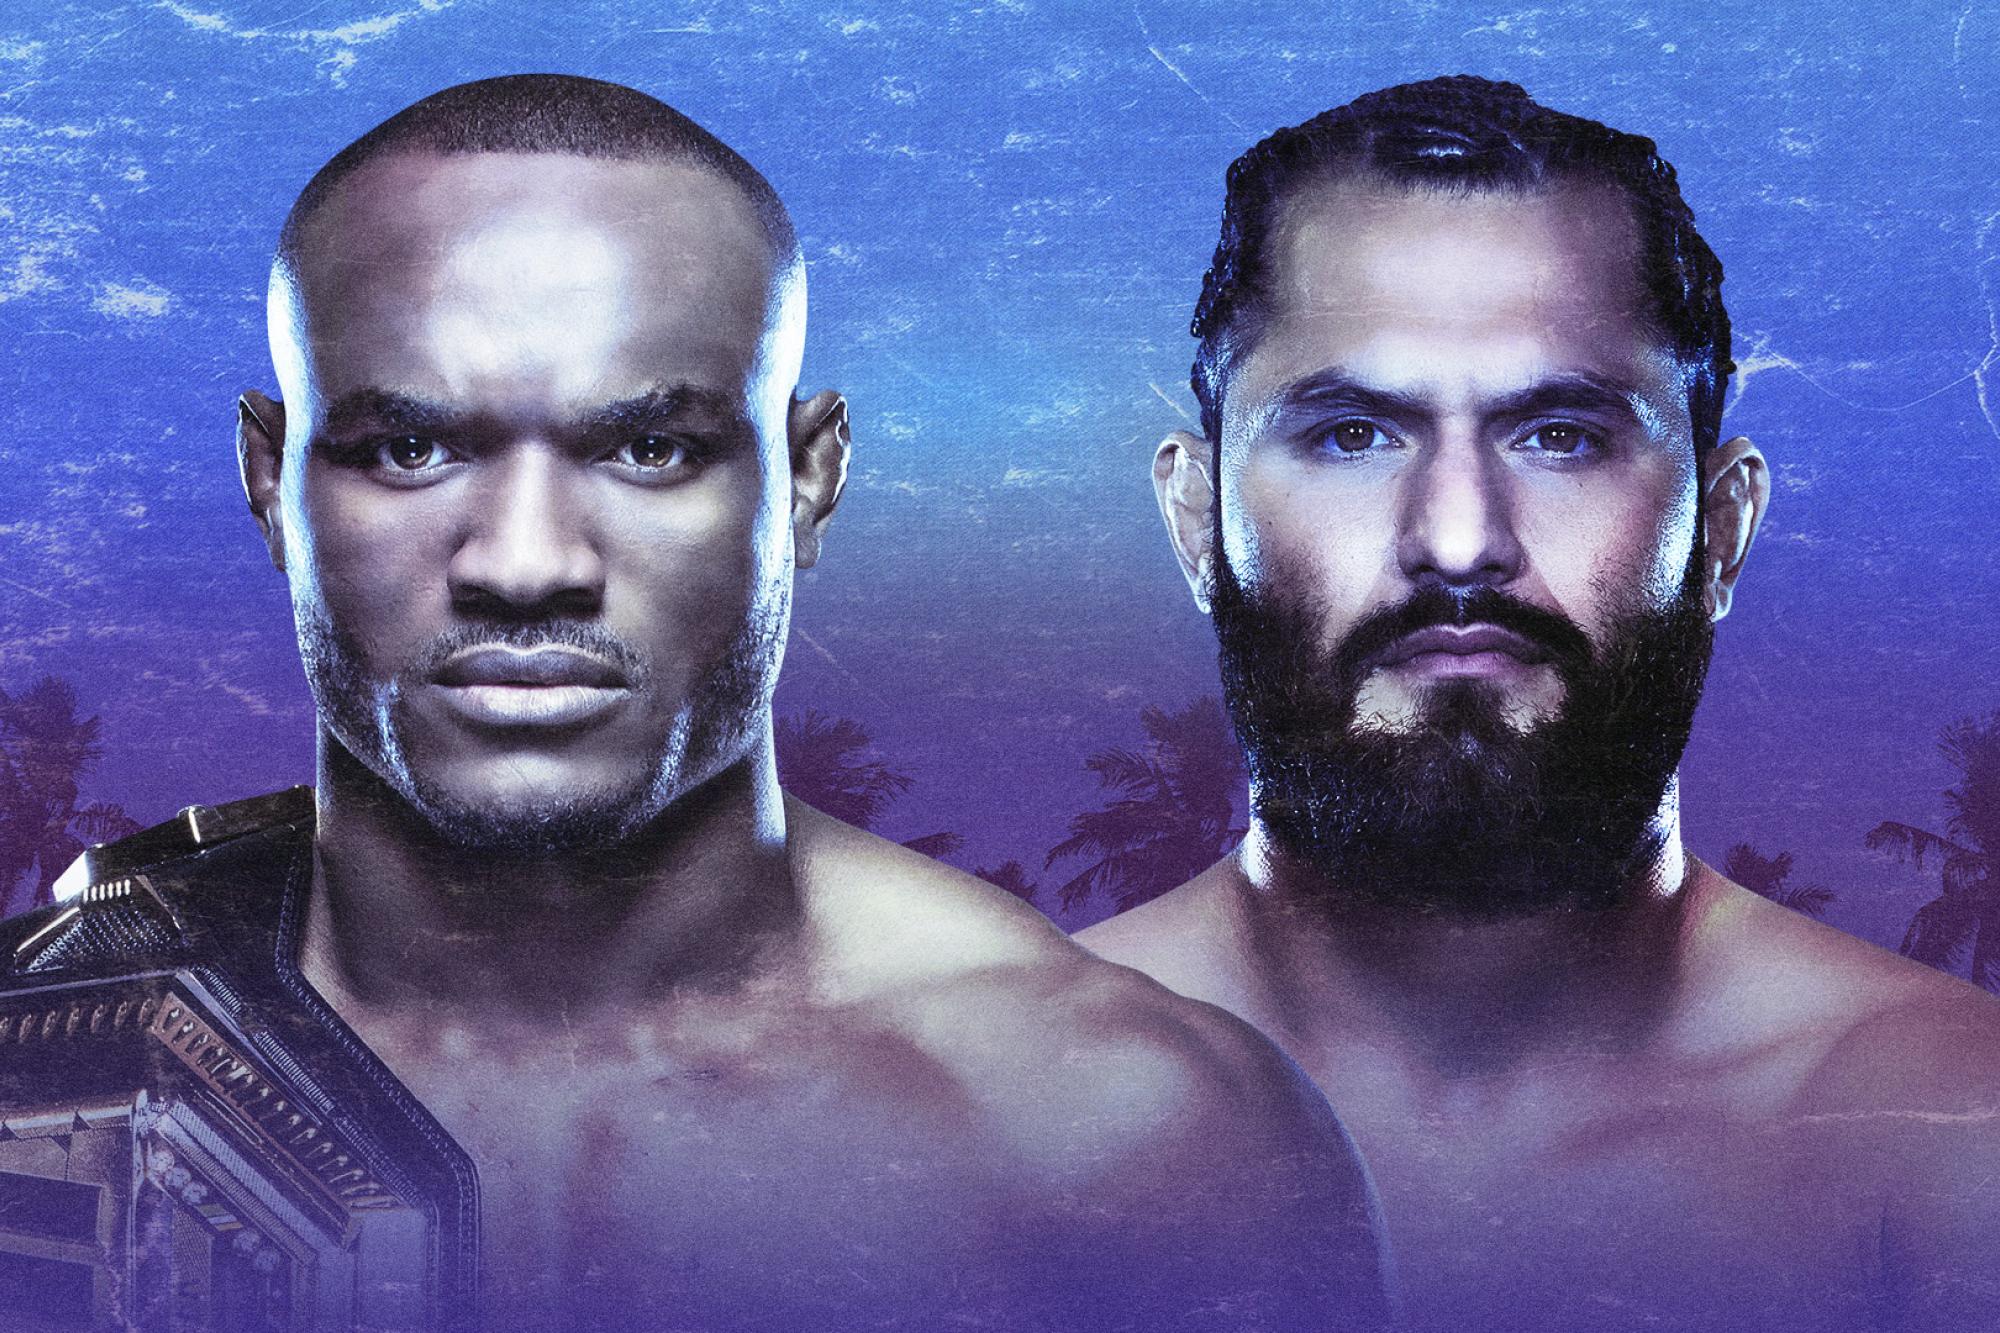 How to Watch the UFC 251 Fight Saturday, July 11